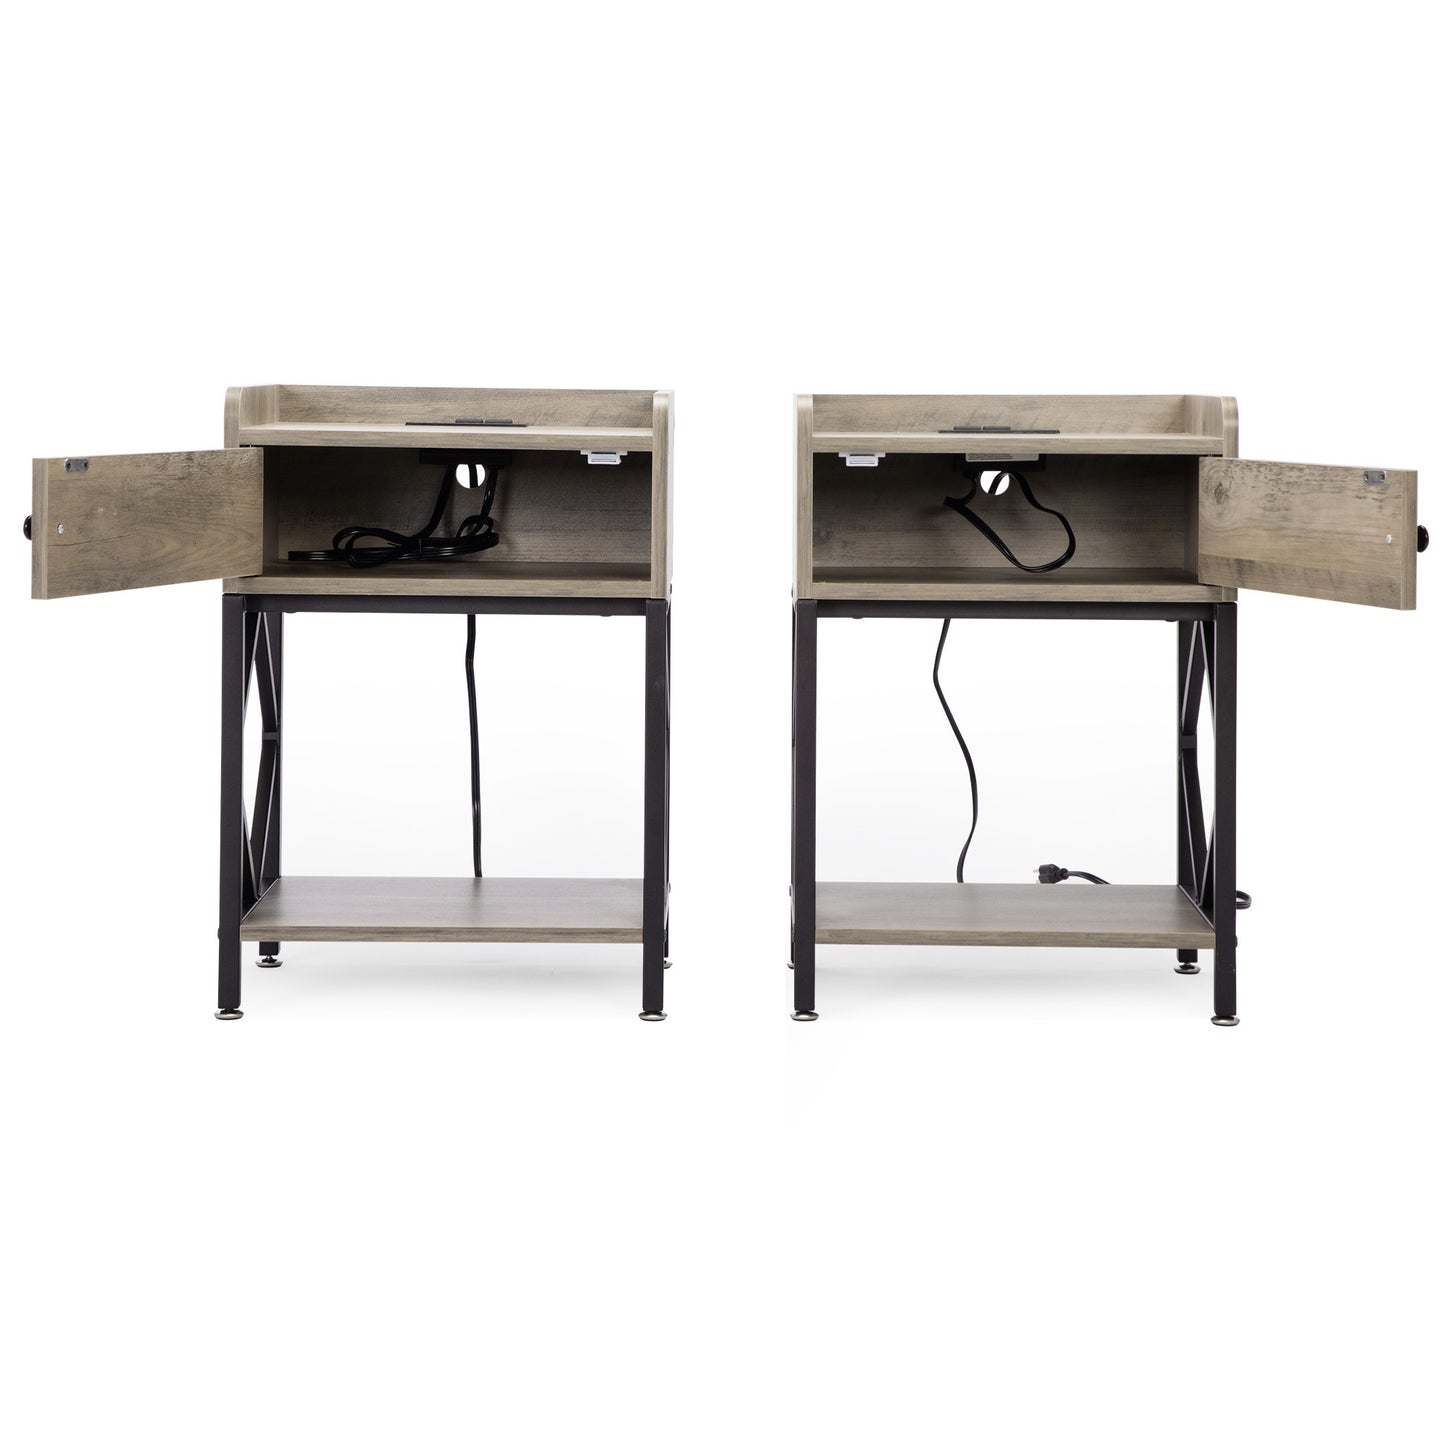 Set of 2 Farmhouse Style Wood End Table Nightstands with Charging Stations and USB Ports, Gray